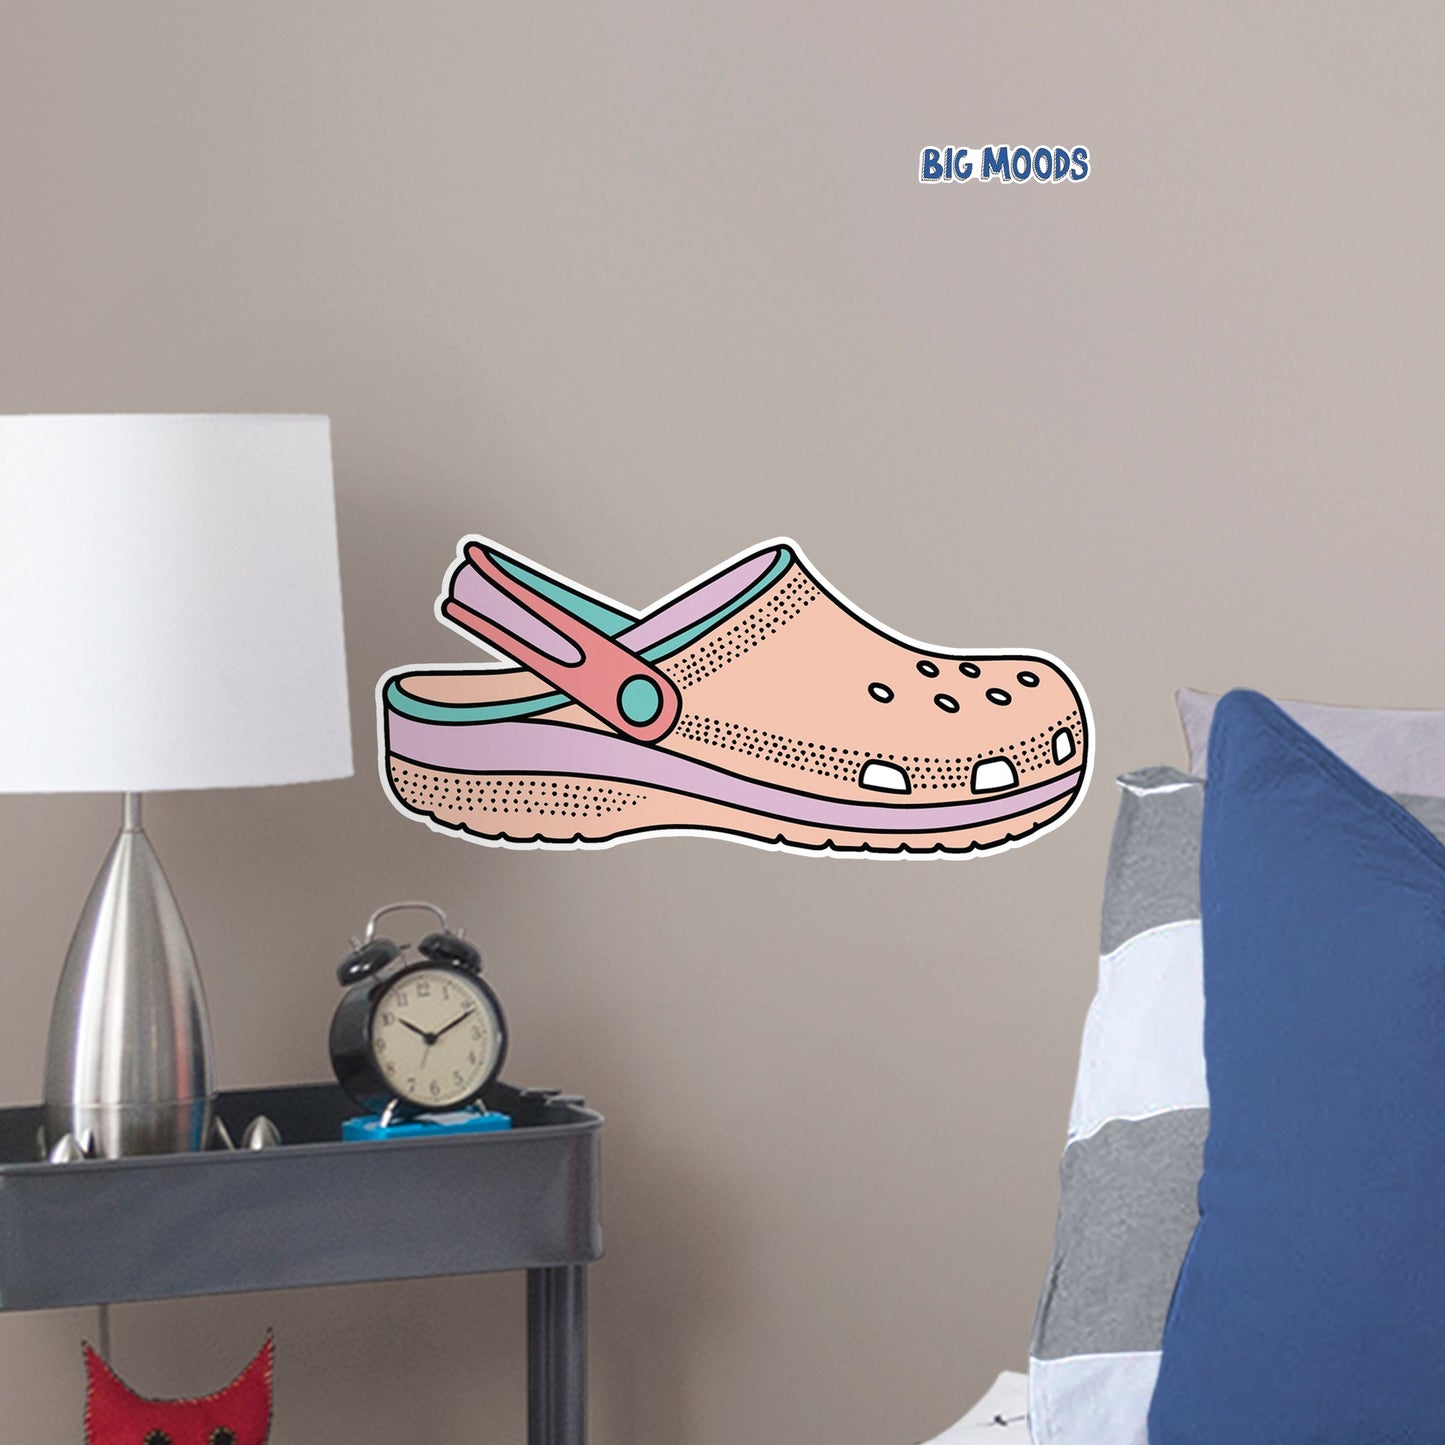 Slip On Sandal (Multi-Color)        - Officially Licensed Big Moods Removable     Adhesive Decal